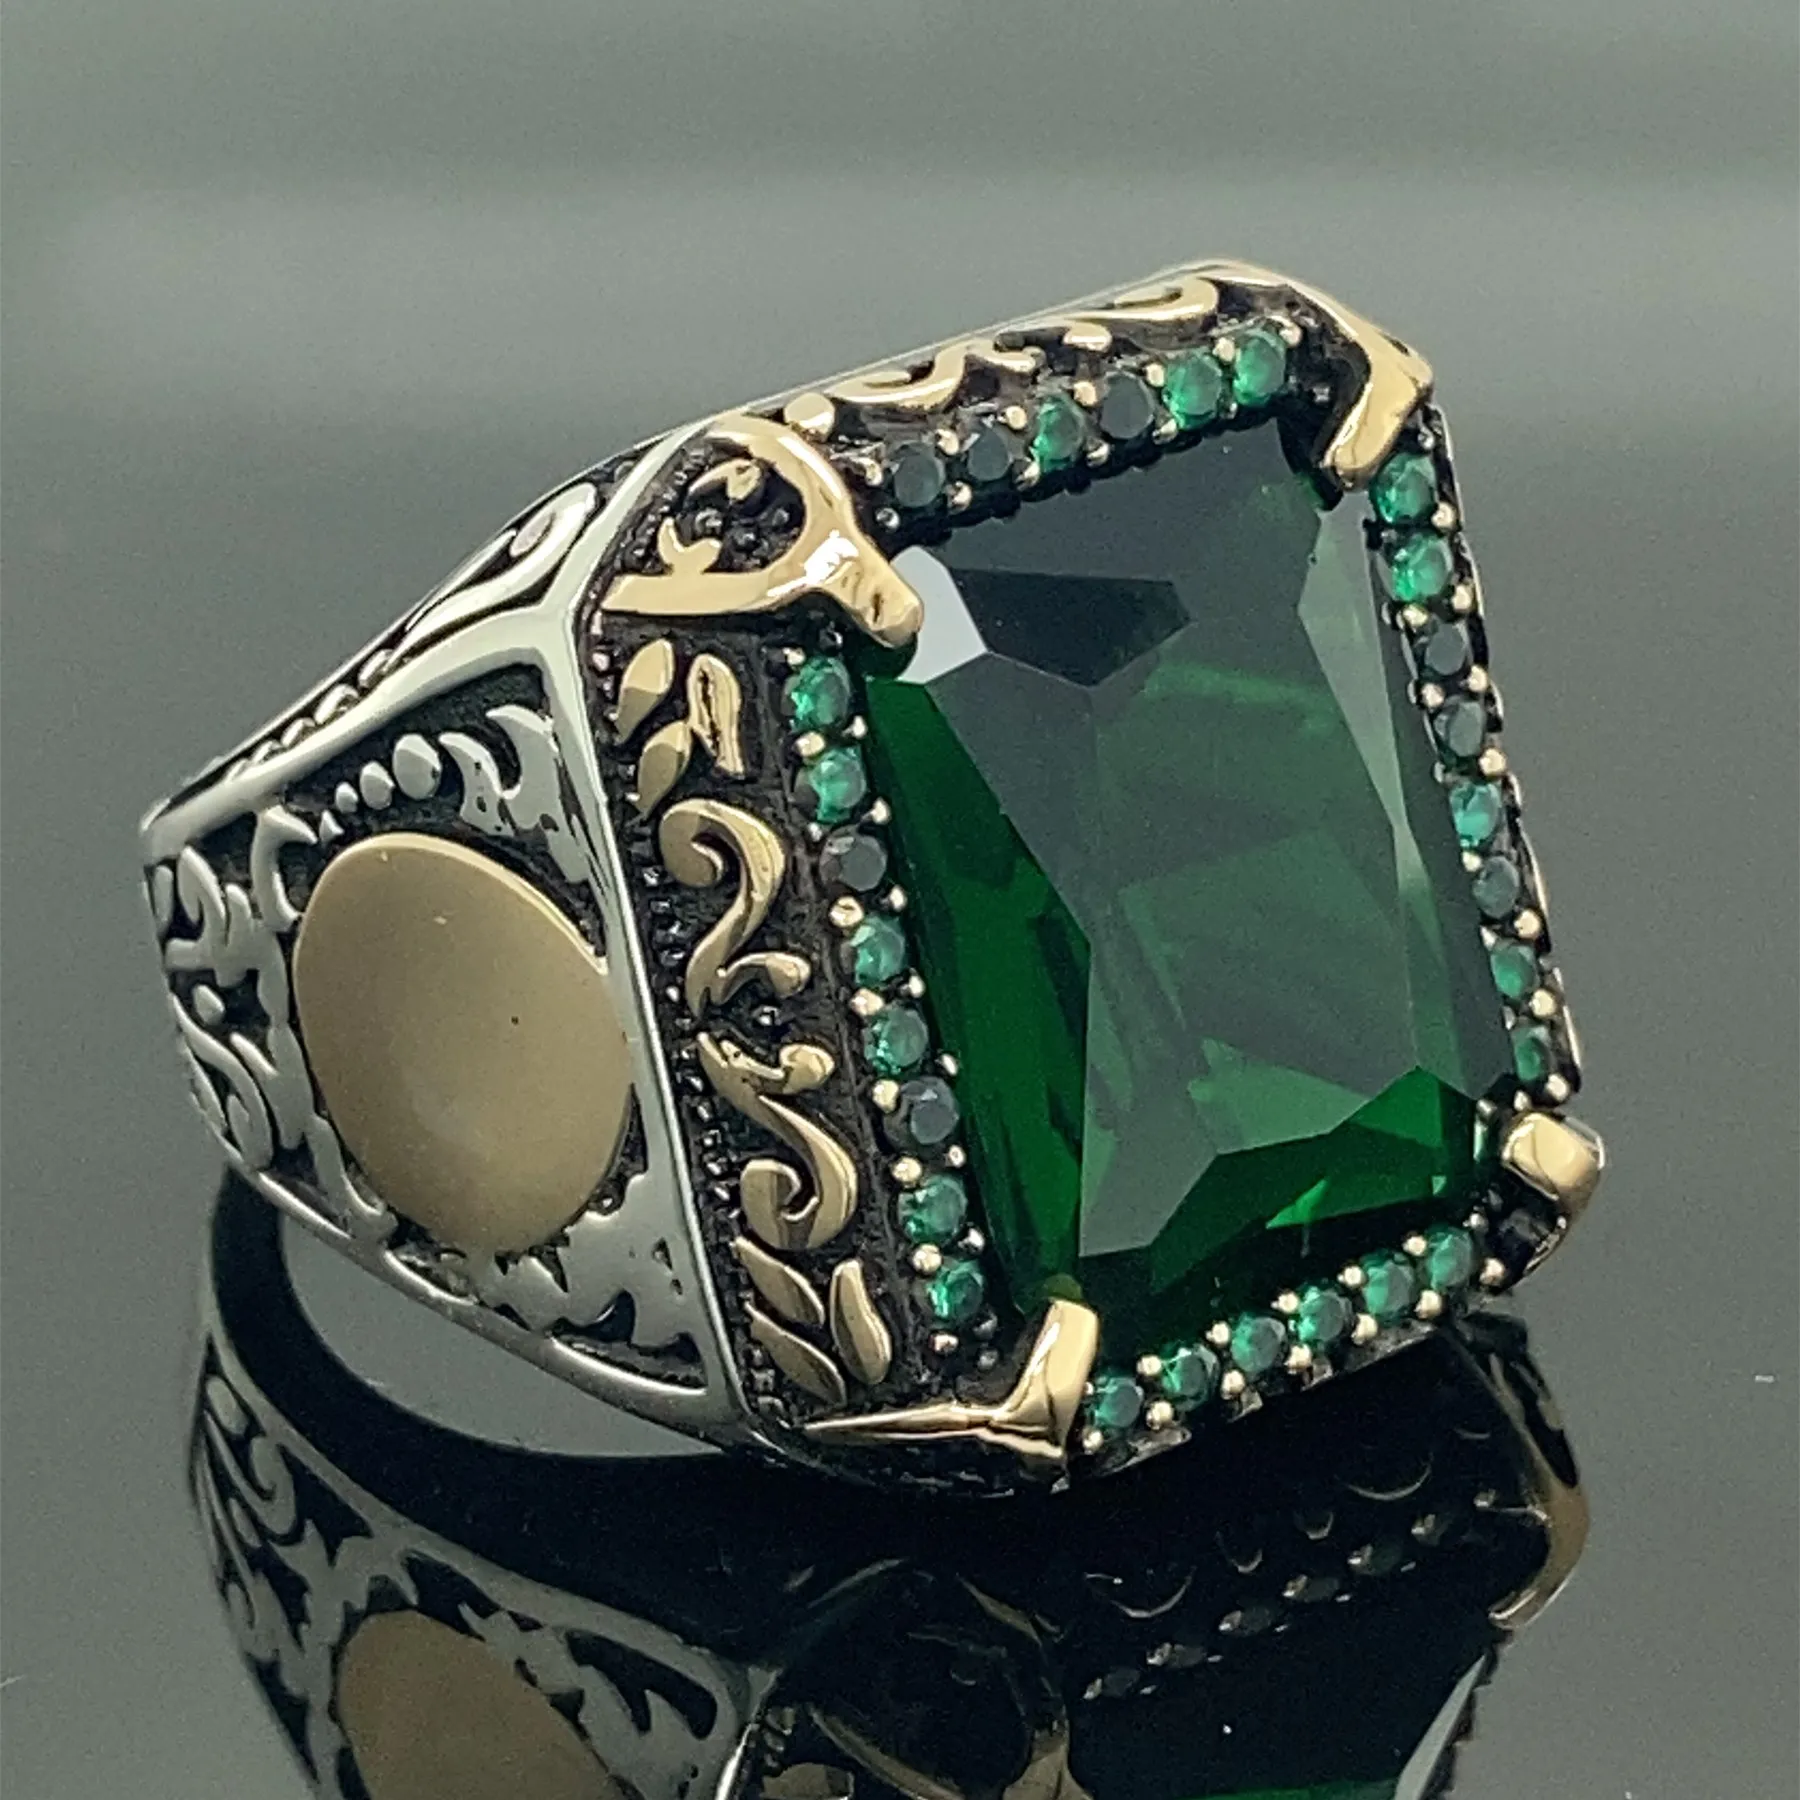 Silver ring with a green gem on Craiyon